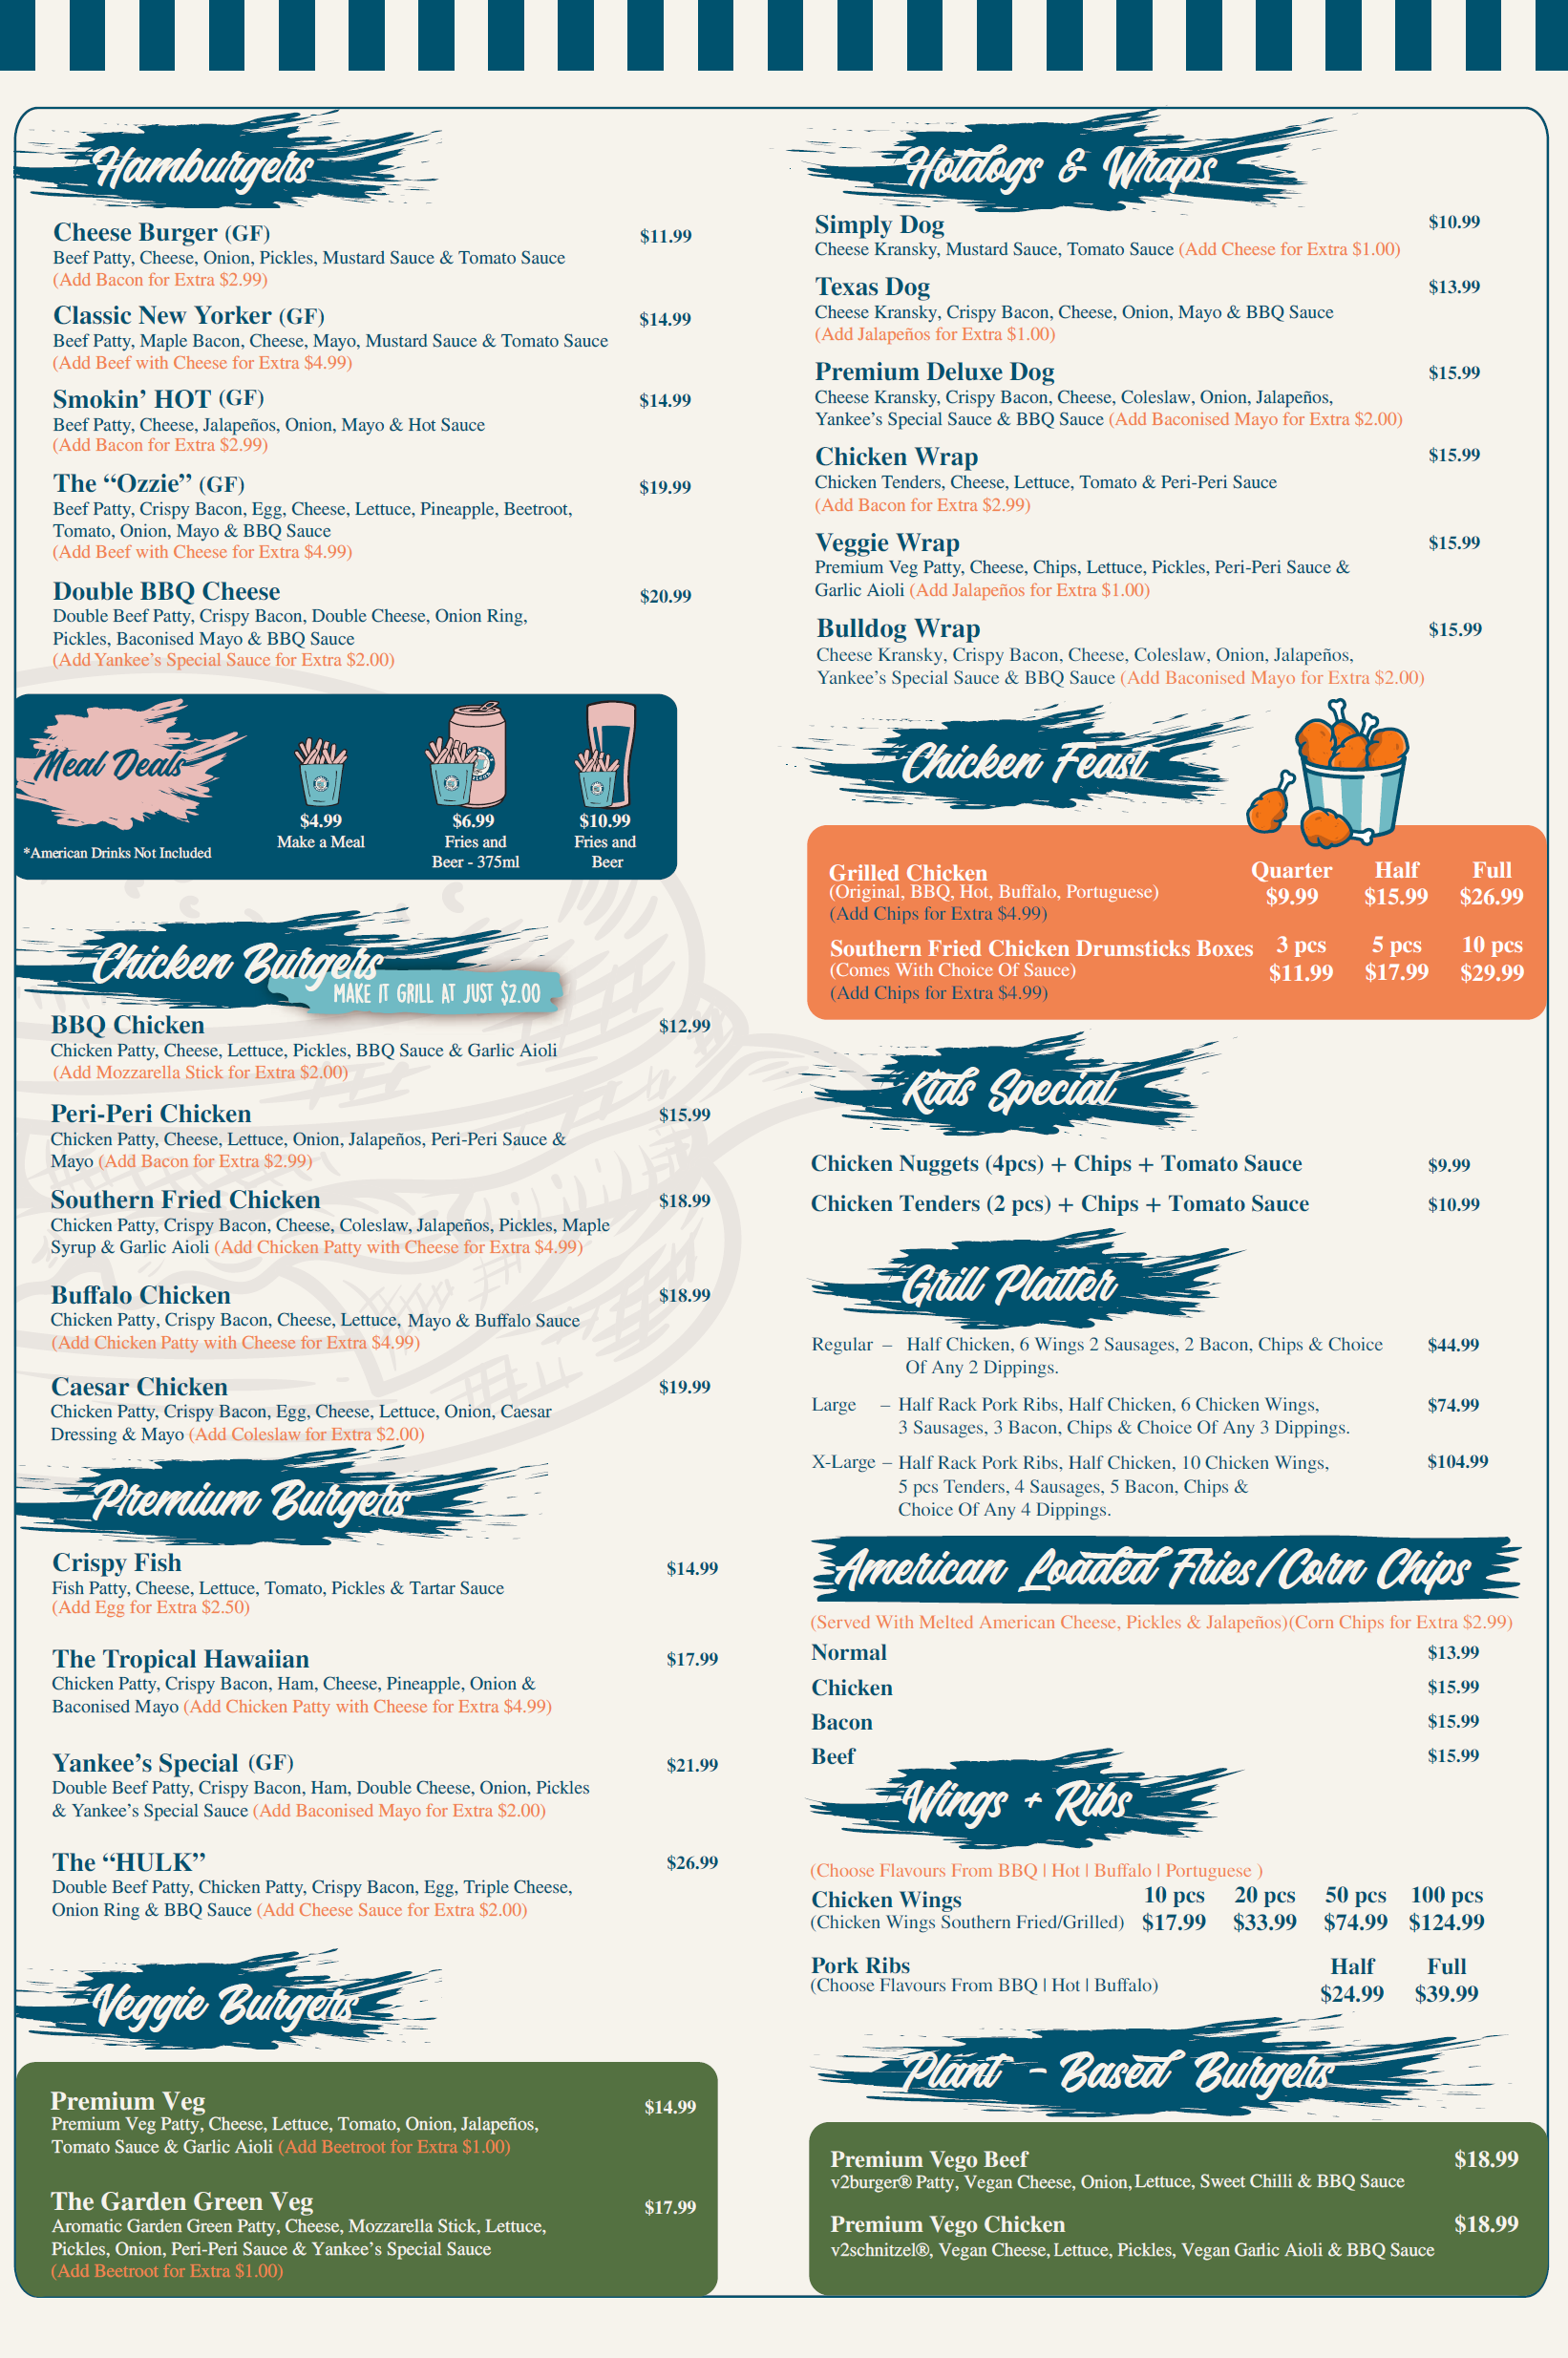 Yankees Burger Bar Melbourne Menu 1-2 Point of Sale Powered by FrabPOS Website and Online Ordering by Order Eats